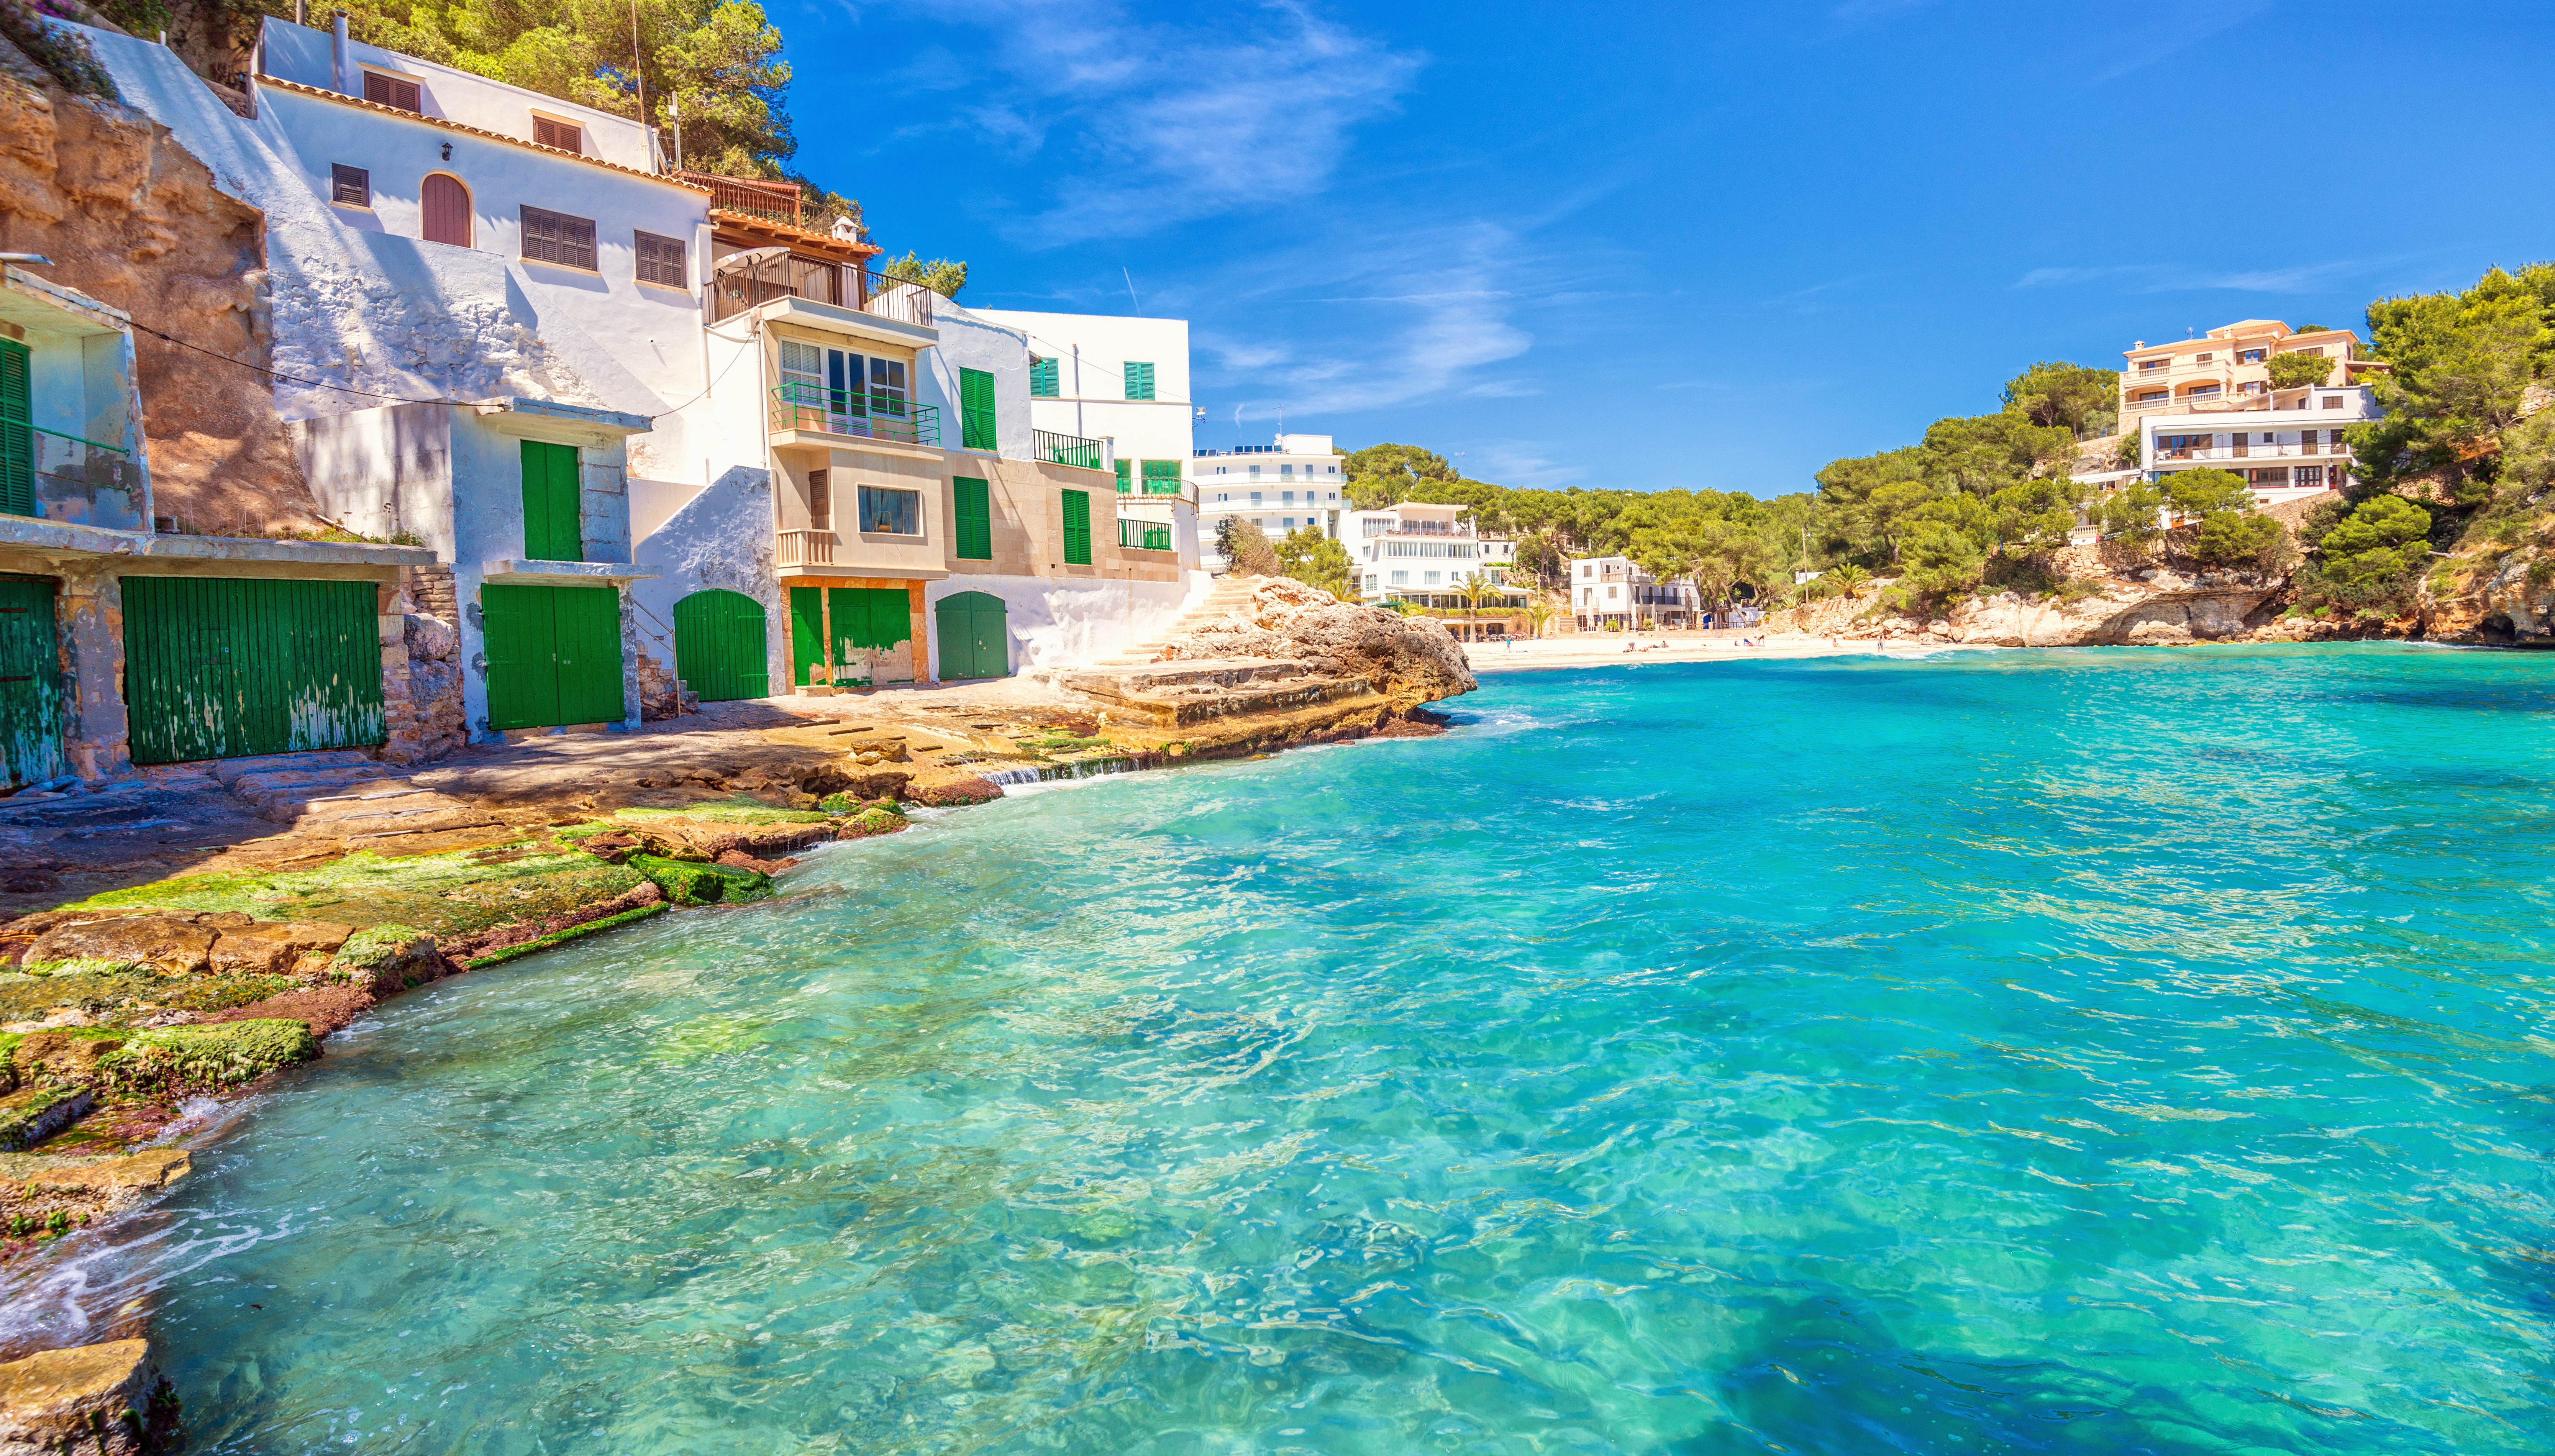 Beaches and boathouses are aplenty in Mallorca